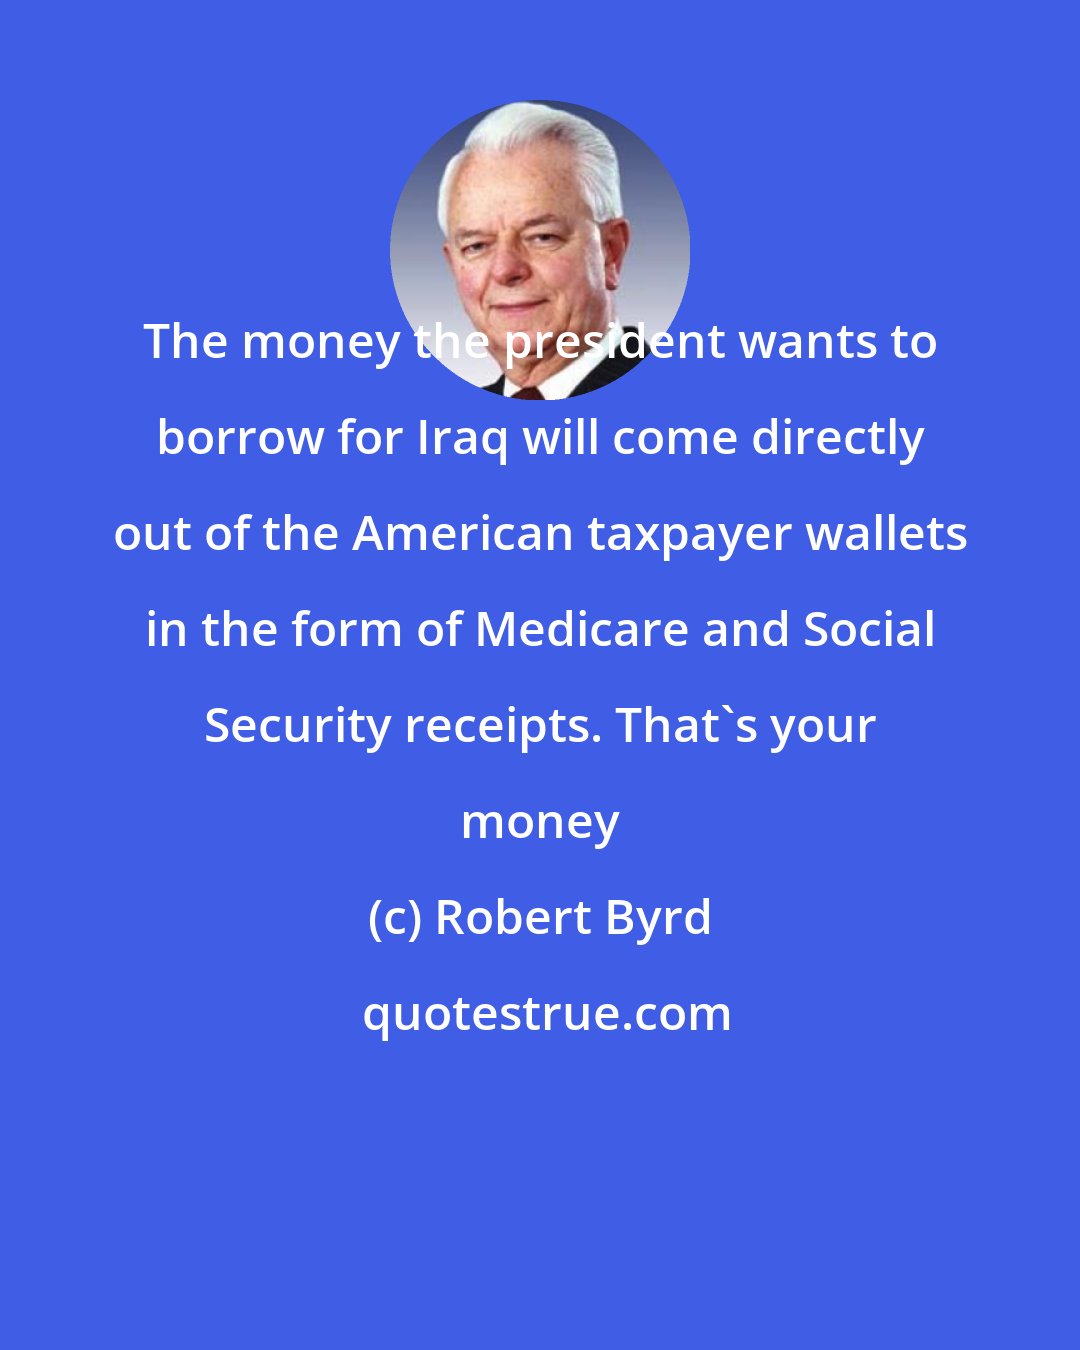 Robert Byrd: The money the president wants to borrow for Iraq will come directly out of the American taxpayer wallets in the form of Medicare and Social Security receipts. That's your money